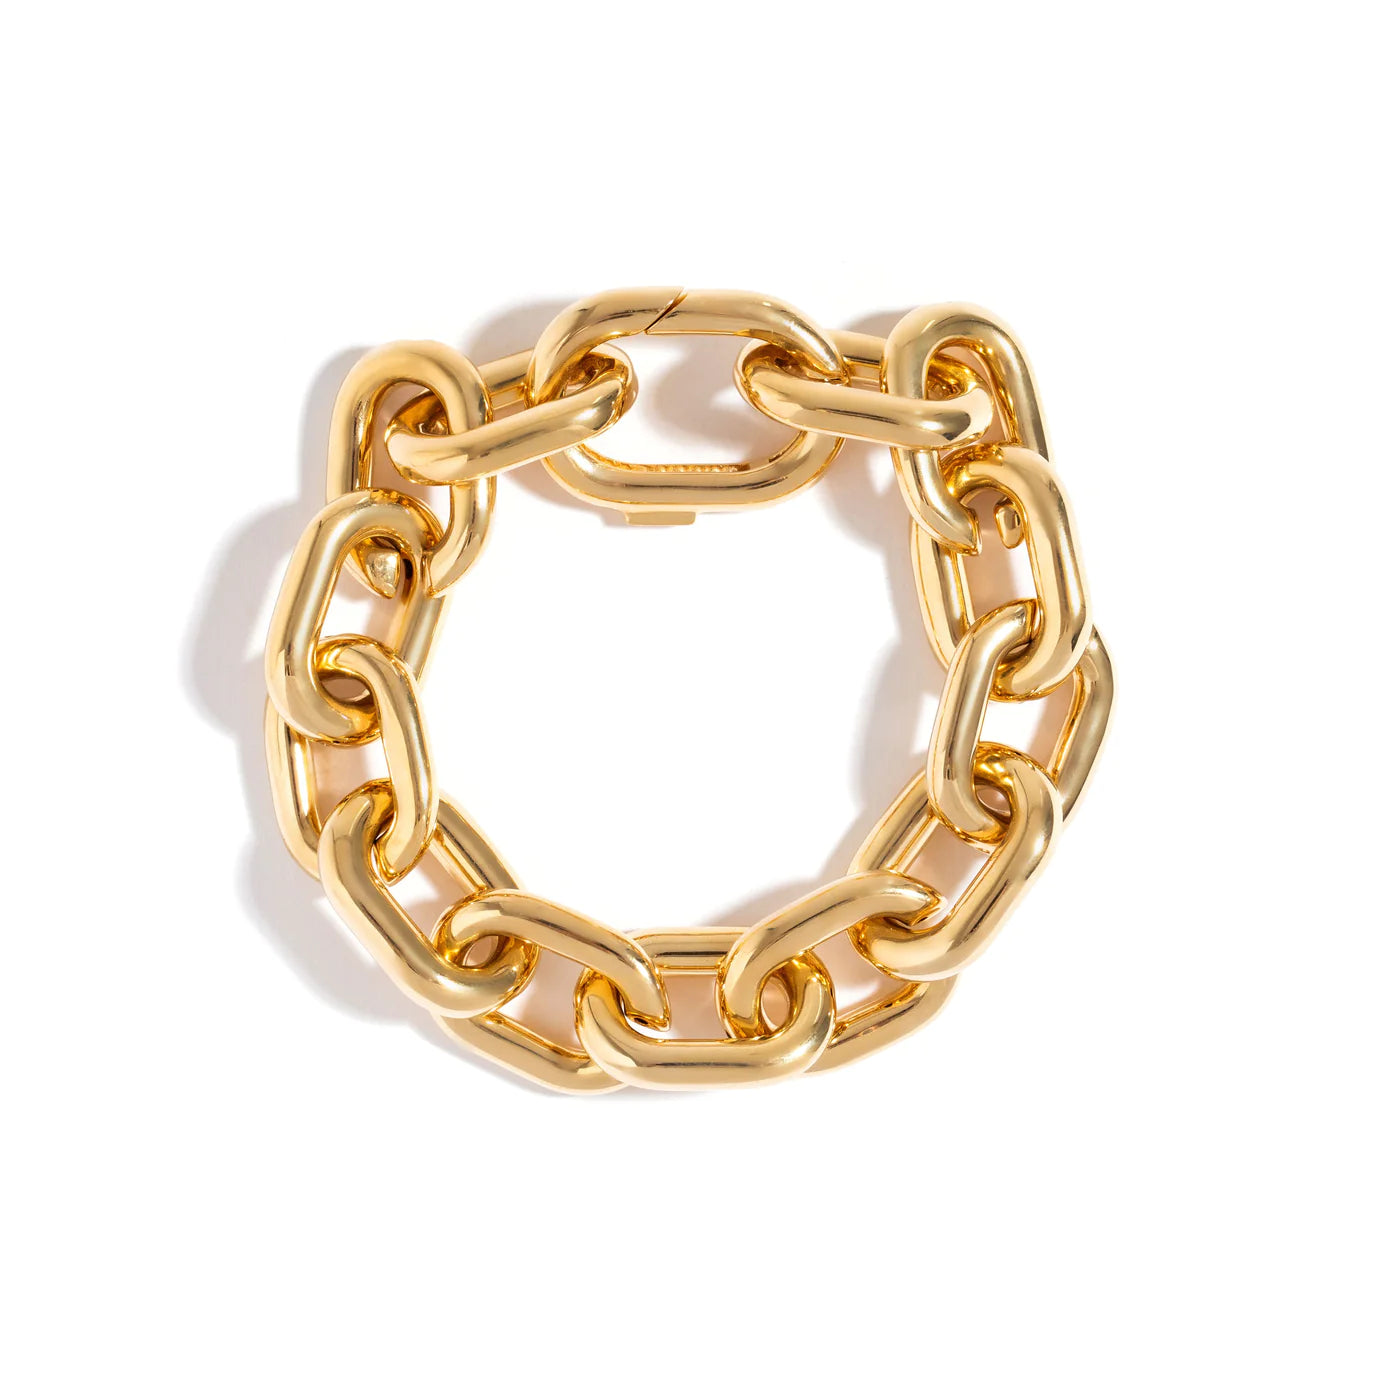 SMALL CHAIN BRACELET IN 18K YELLOW GOLD PLATED SILVER